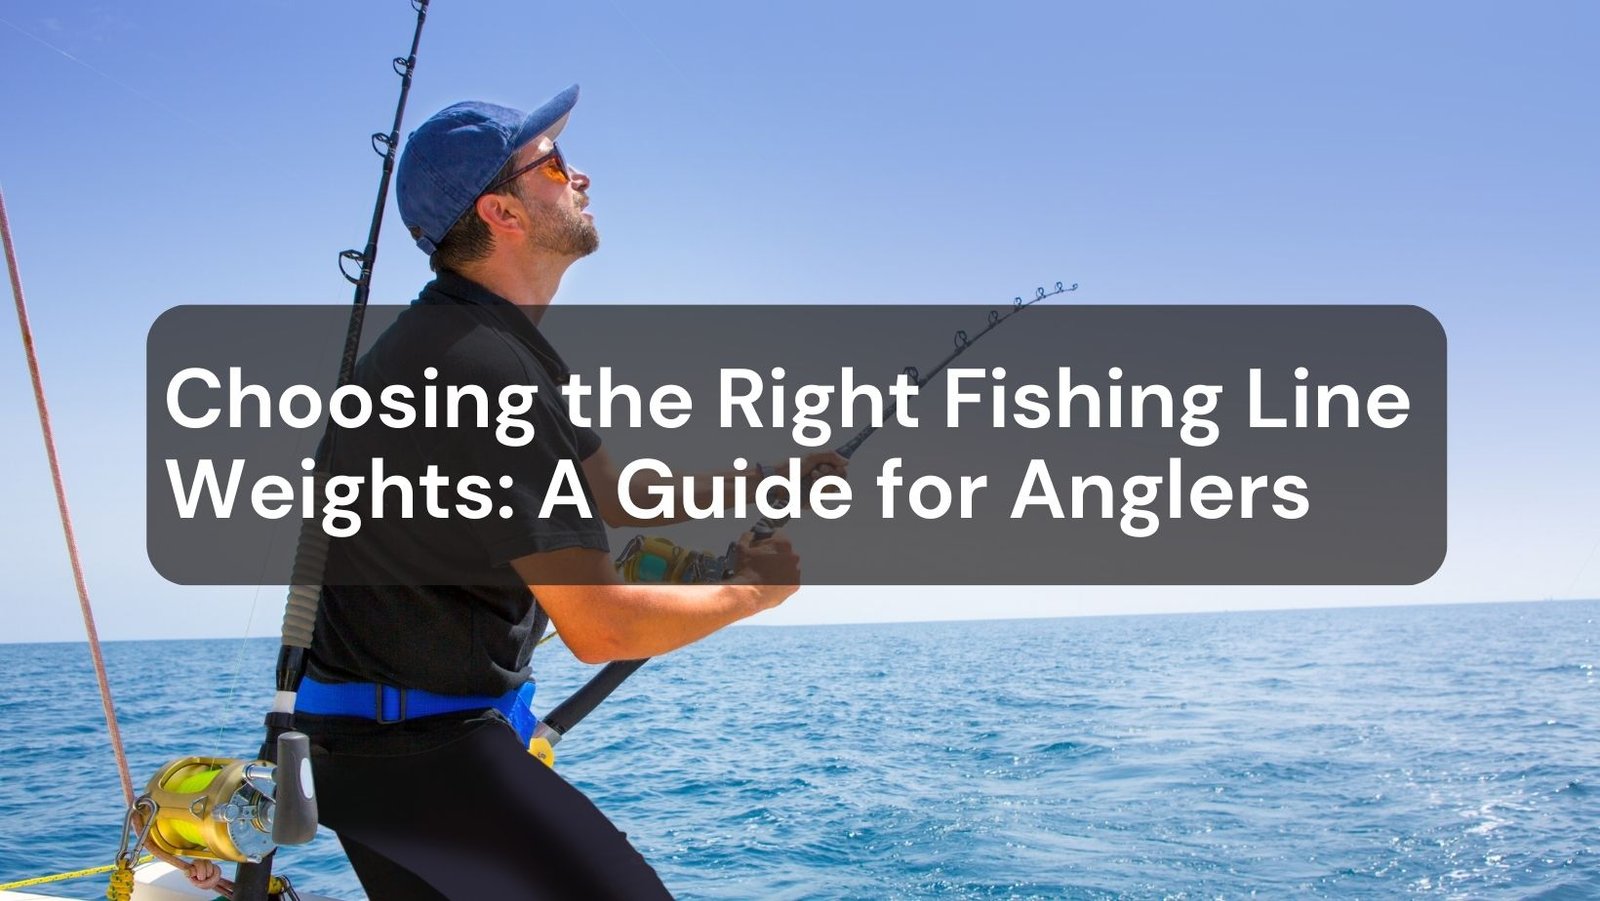 Choosing the Right Fishing Line Weights: A Guide for Anglers